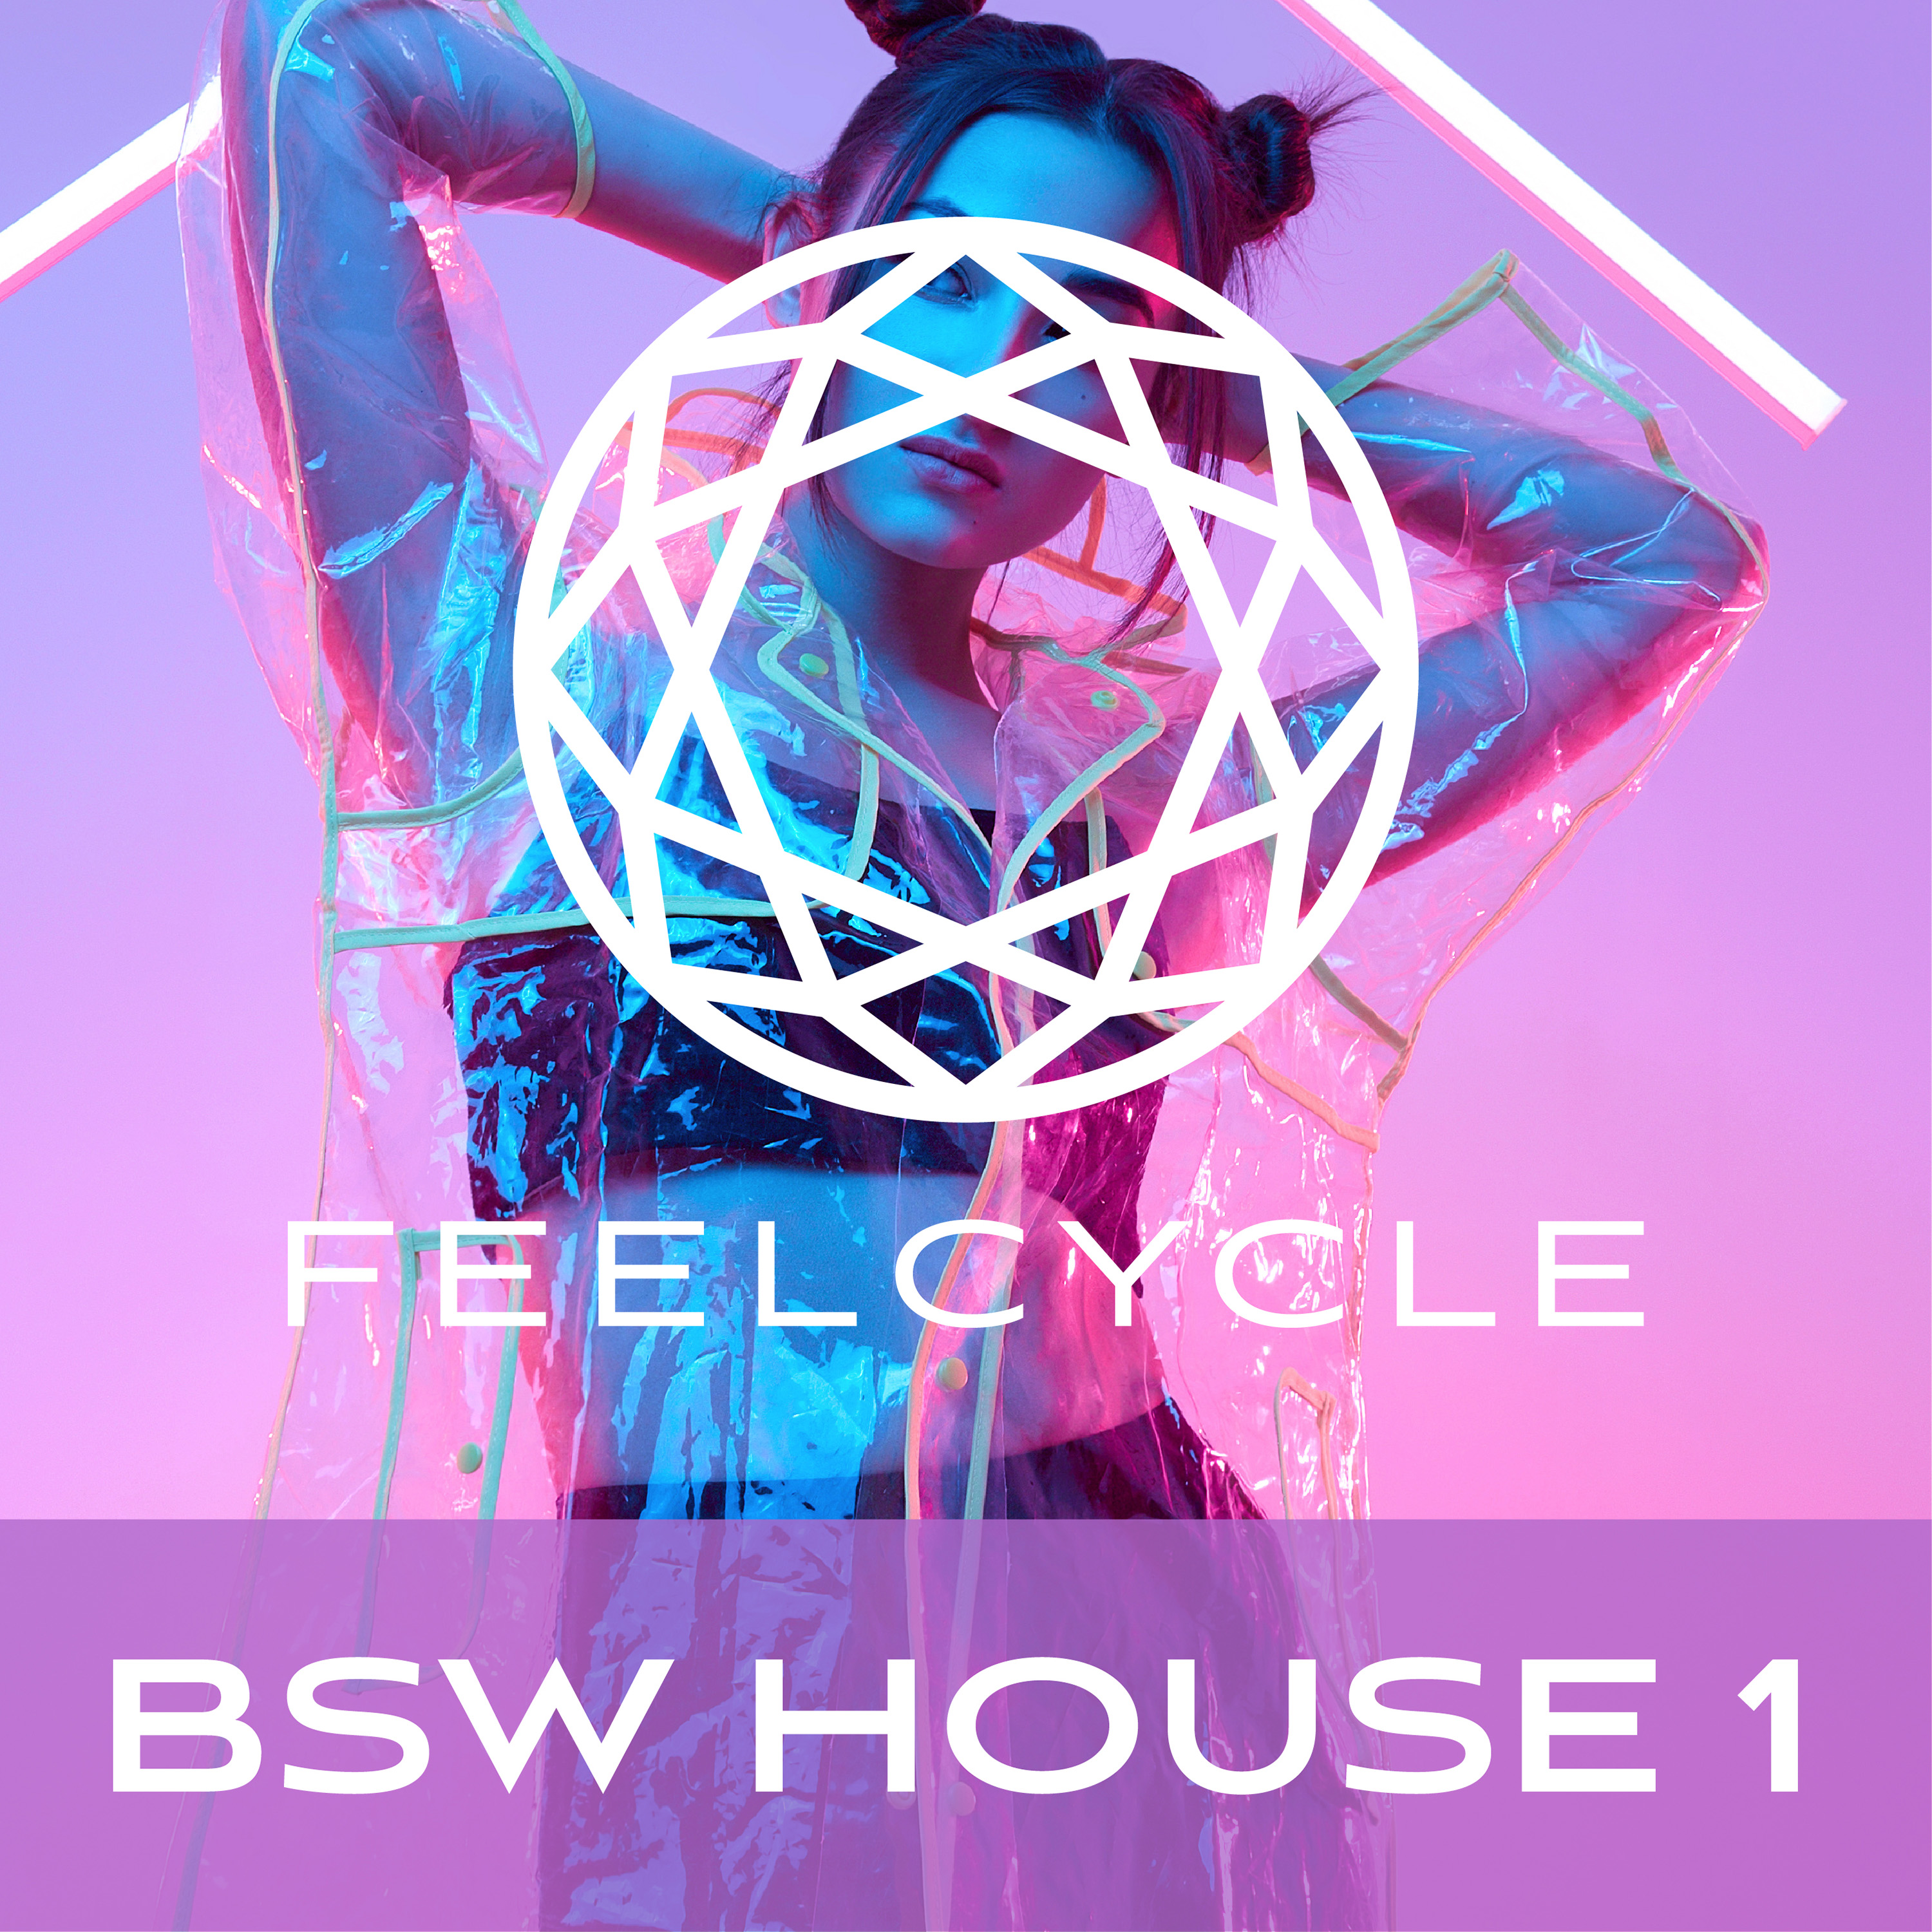 BSW House 1